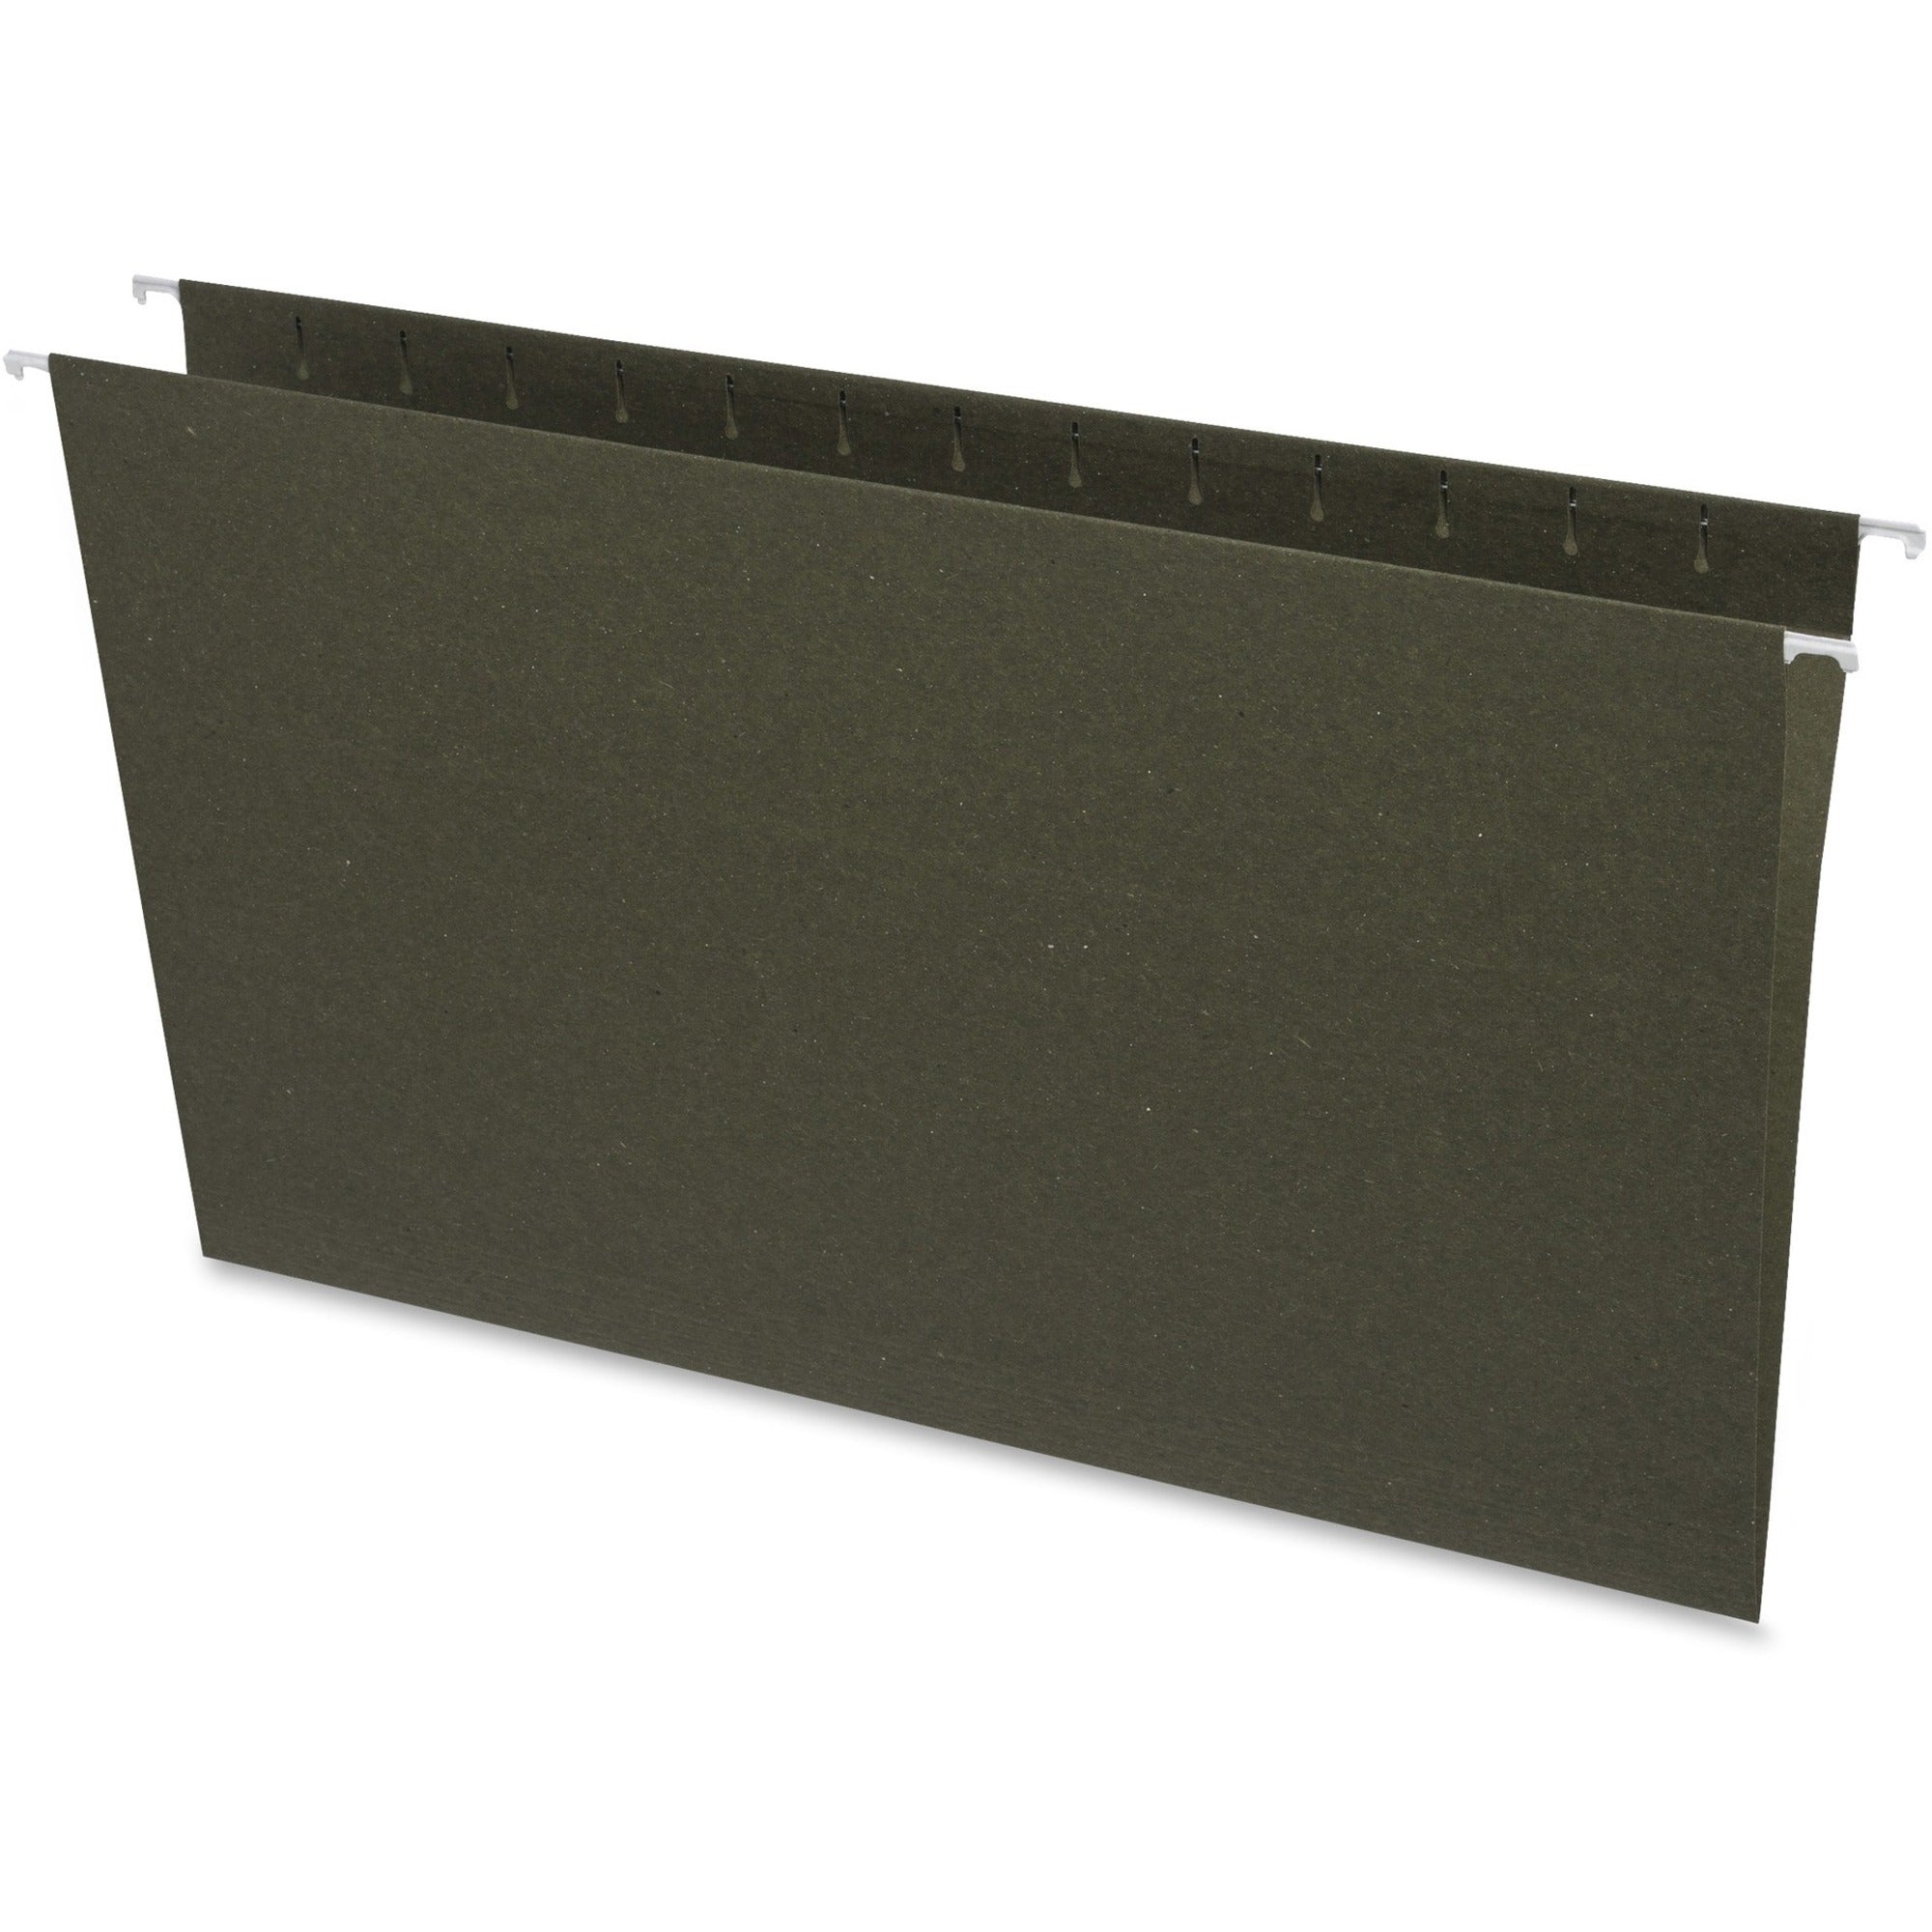 Business Source Legal Recycled Hanging Folder - 8 1/2" x 14" - Green - 100% Recycled - 25 / Box - 